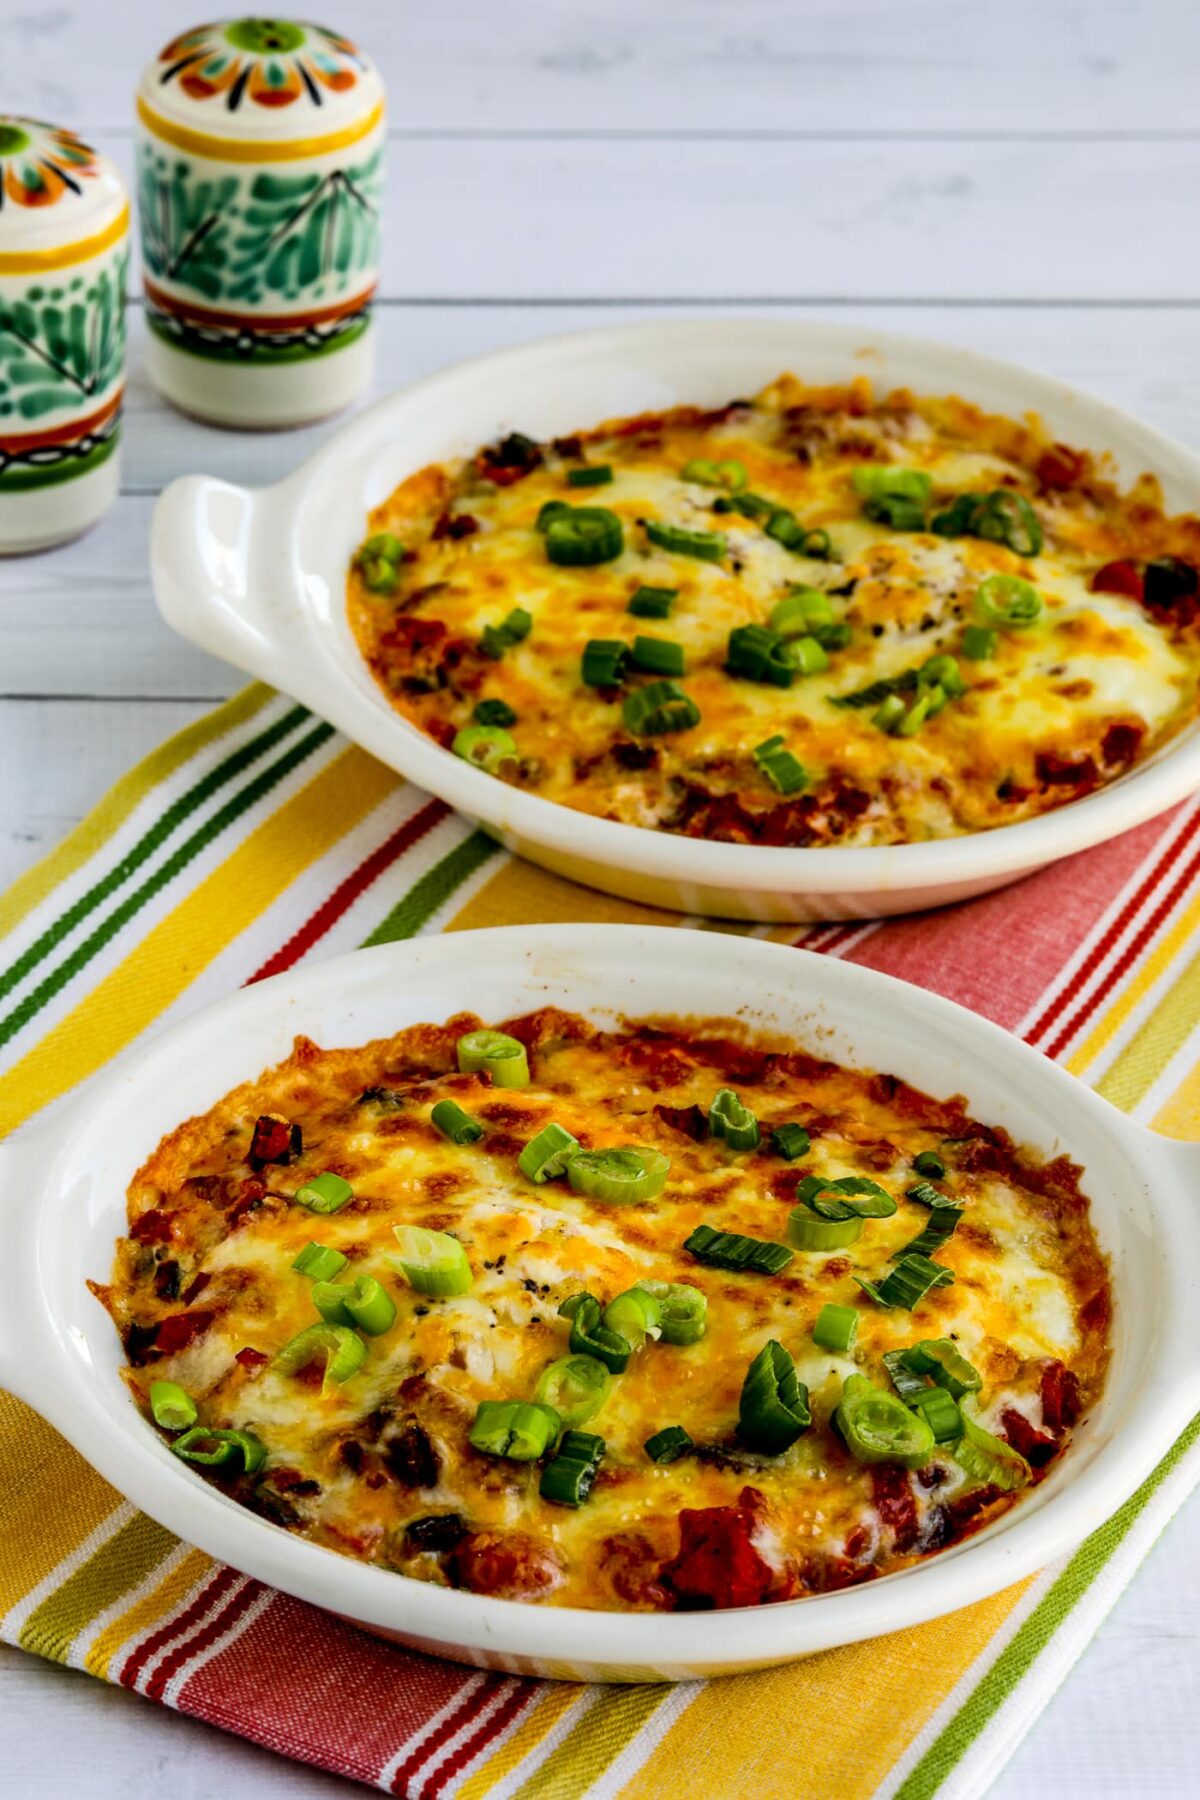 Mexican Baked Eggs shown in two small baking dishes